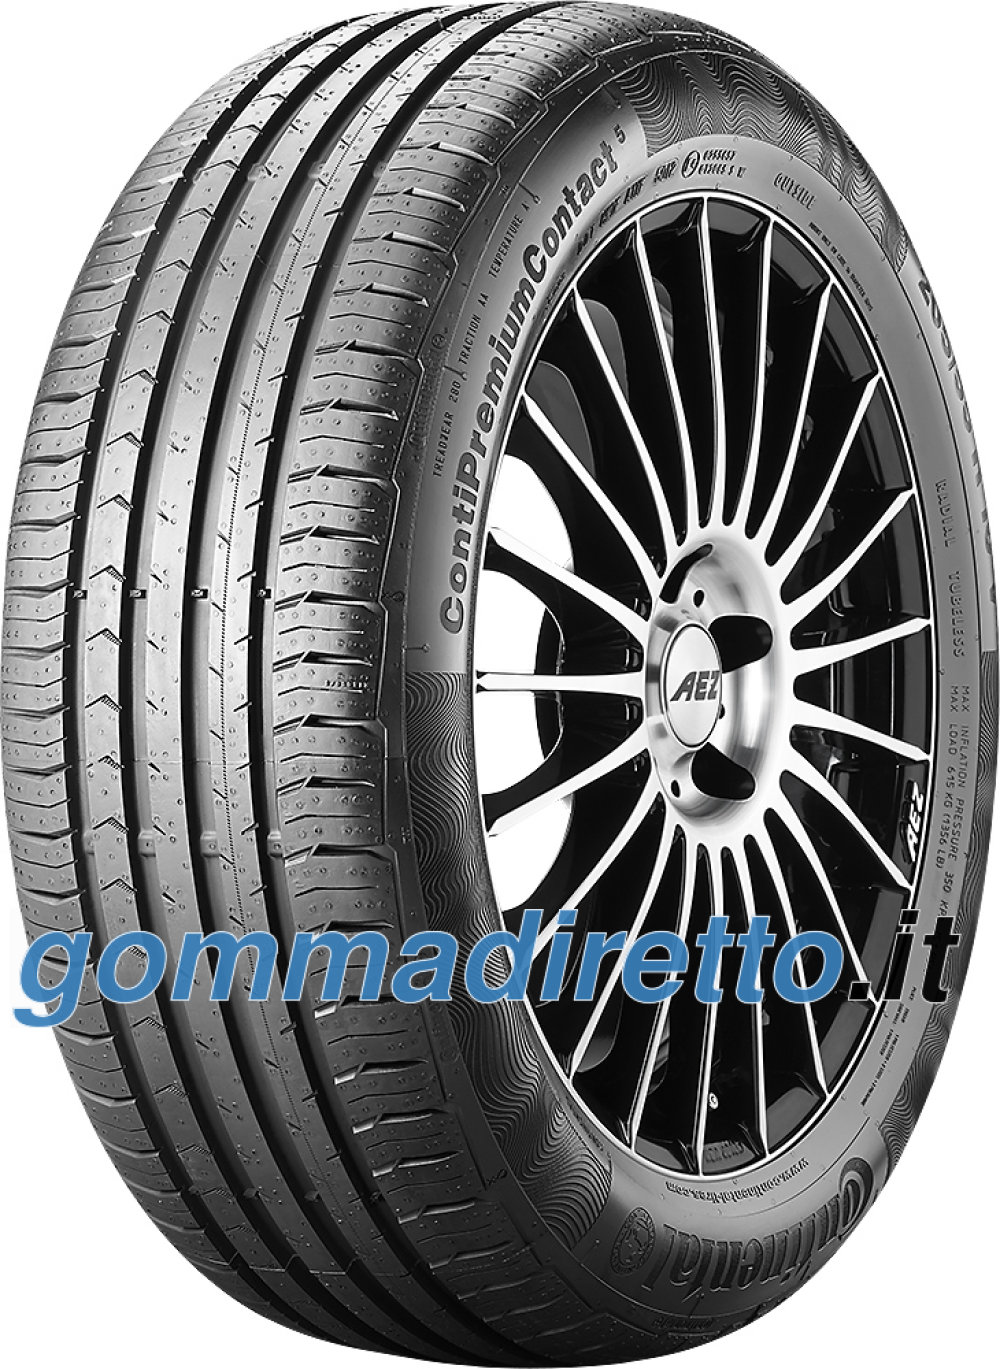 Image of Continental ContiPremiumContact 5 ( 215/55 R17 94W Conti Seal )